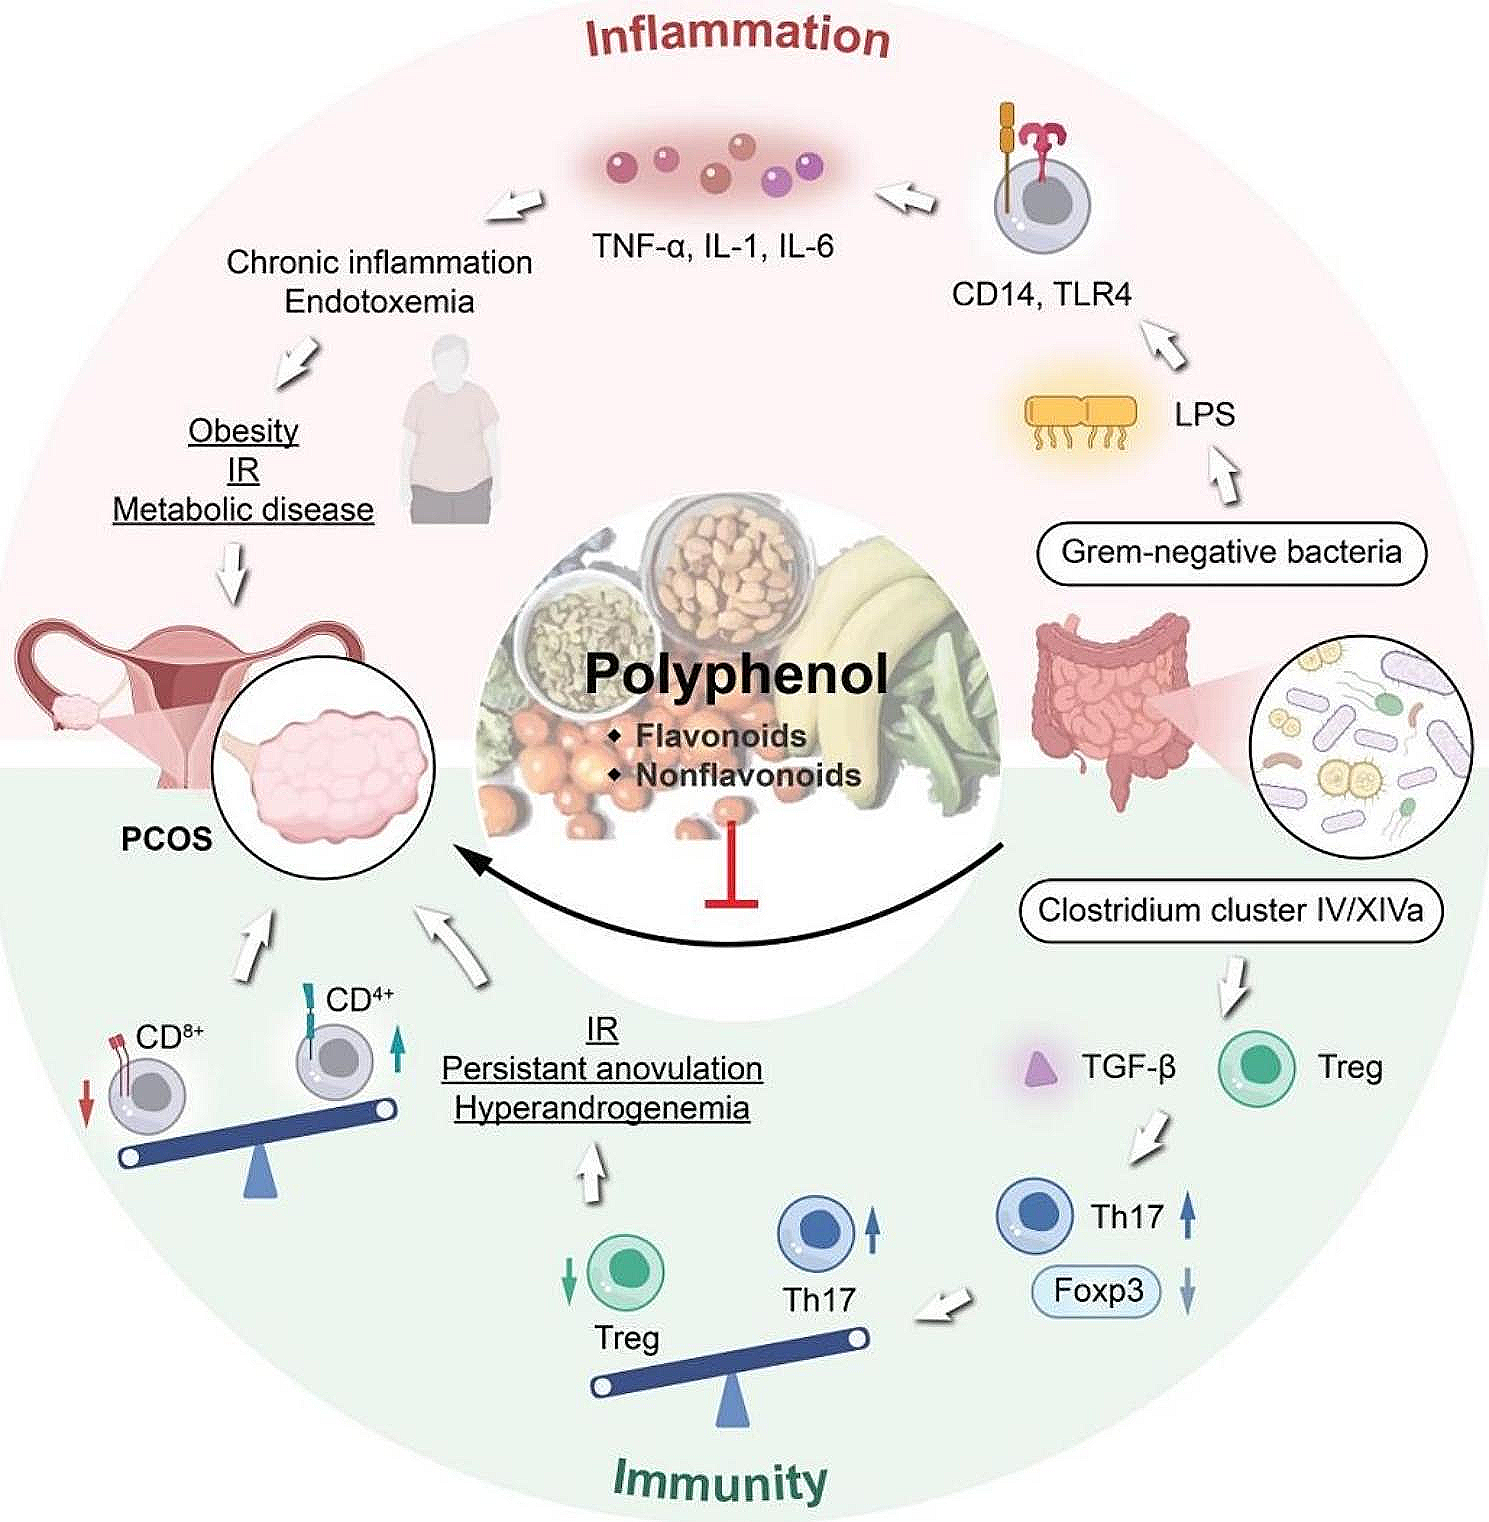 Role of polyphenols in remodeling the host gut microbiota in polycystic ovary syndrome